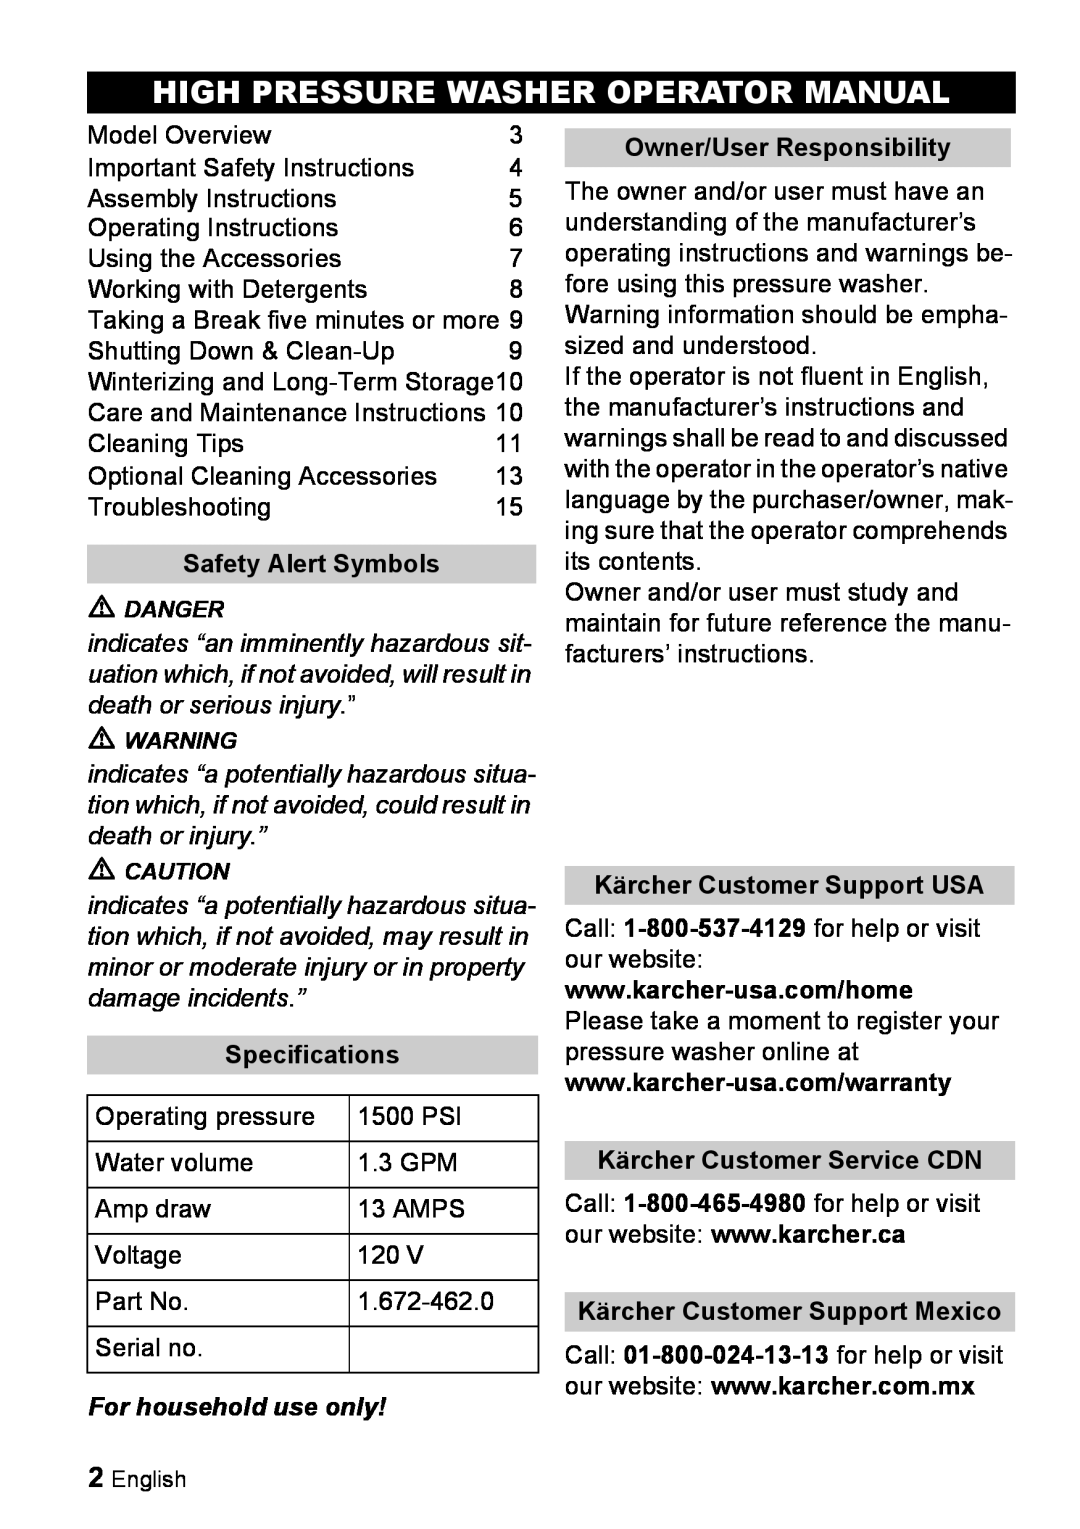 Karcher K 2.56M manual High Pressure Washer Operator Manual, Safety Alert Symbols, Specifications, For household use only 